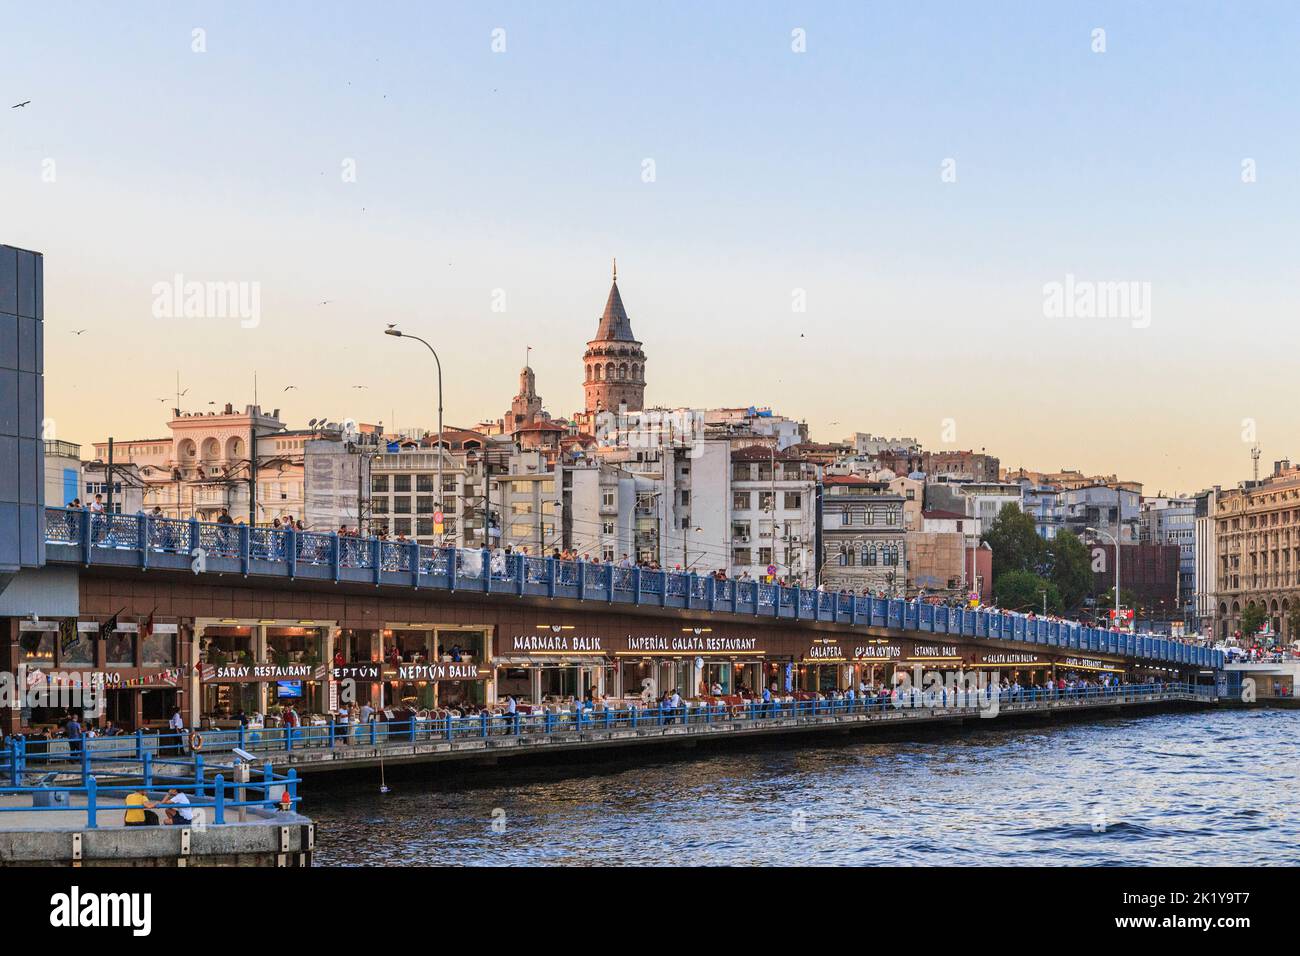 ISTANBUL, TURKEY - SEPTEMBER 12, 2017: This is a view of the Galata Bridge and the Galata Tower at sunset. Stock Photo